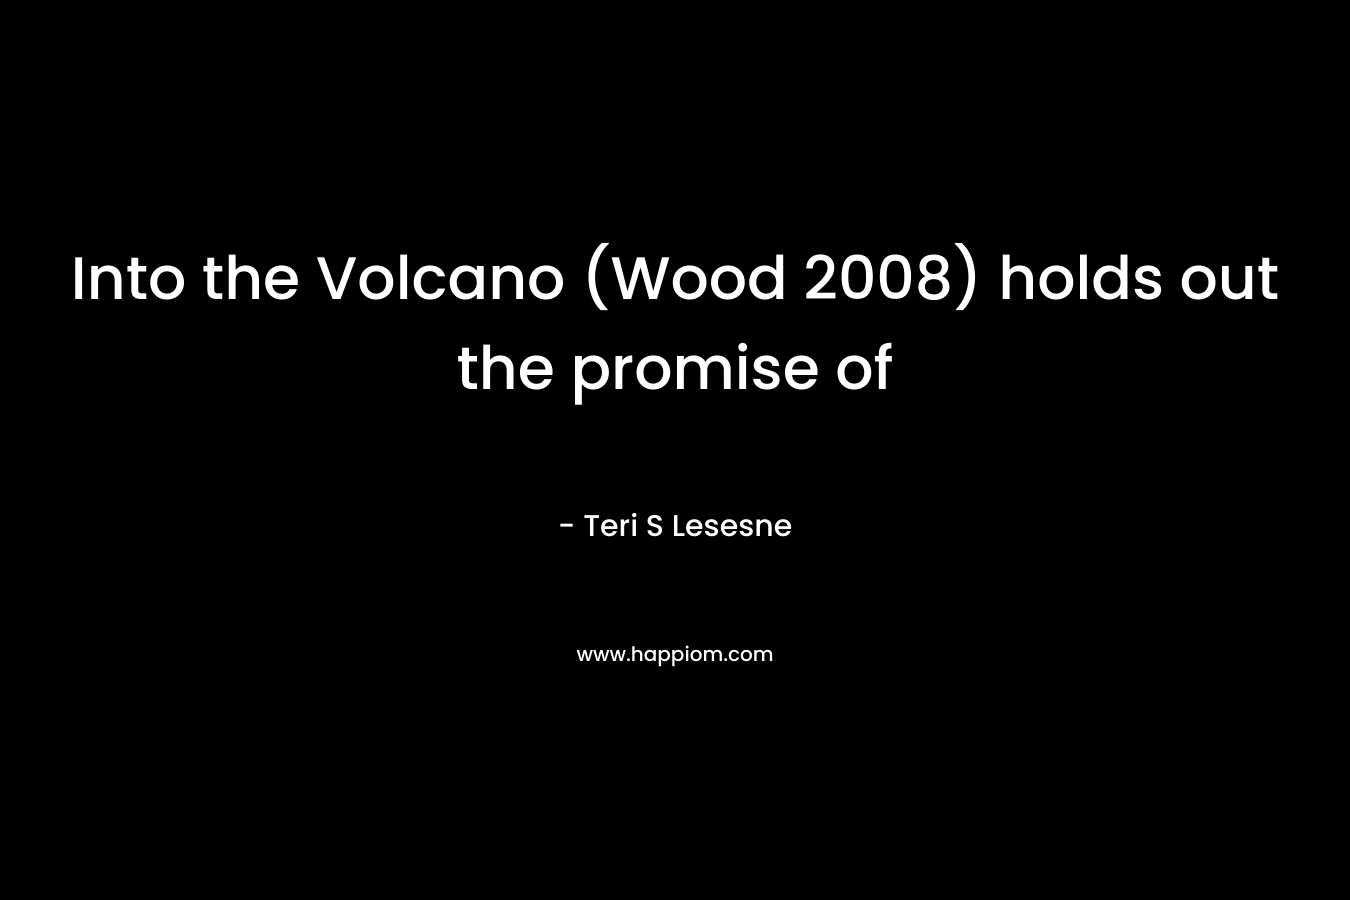 Into the Volcano (Wood 2008) holds out the promise of – Teri S Lesesne